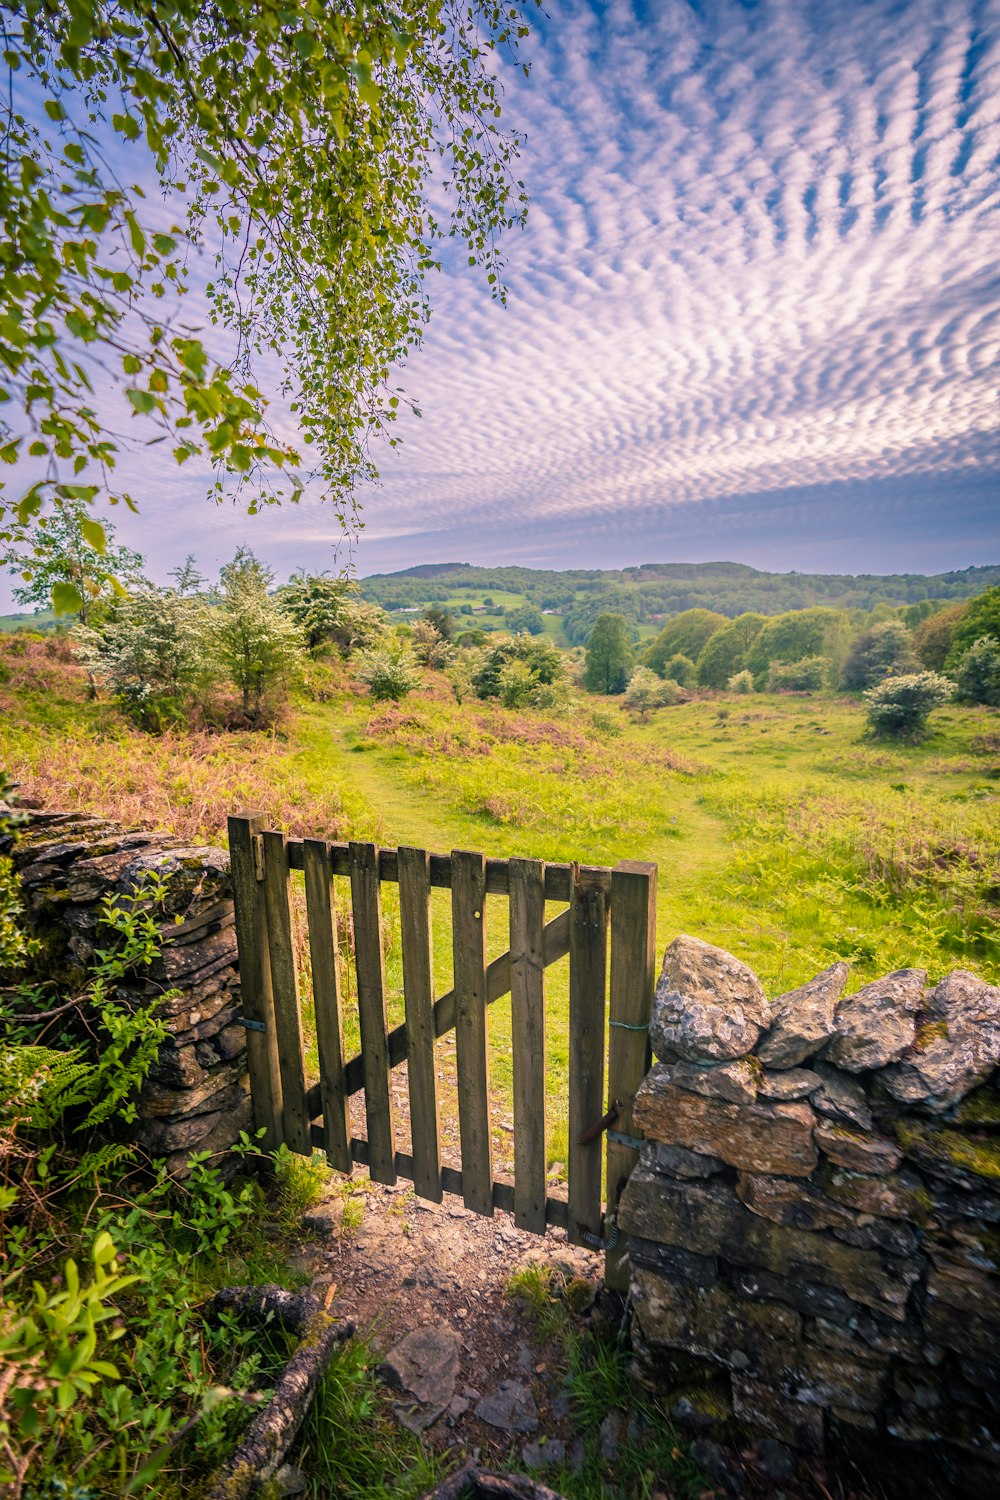 a wooden gate in the middle of a grassy field